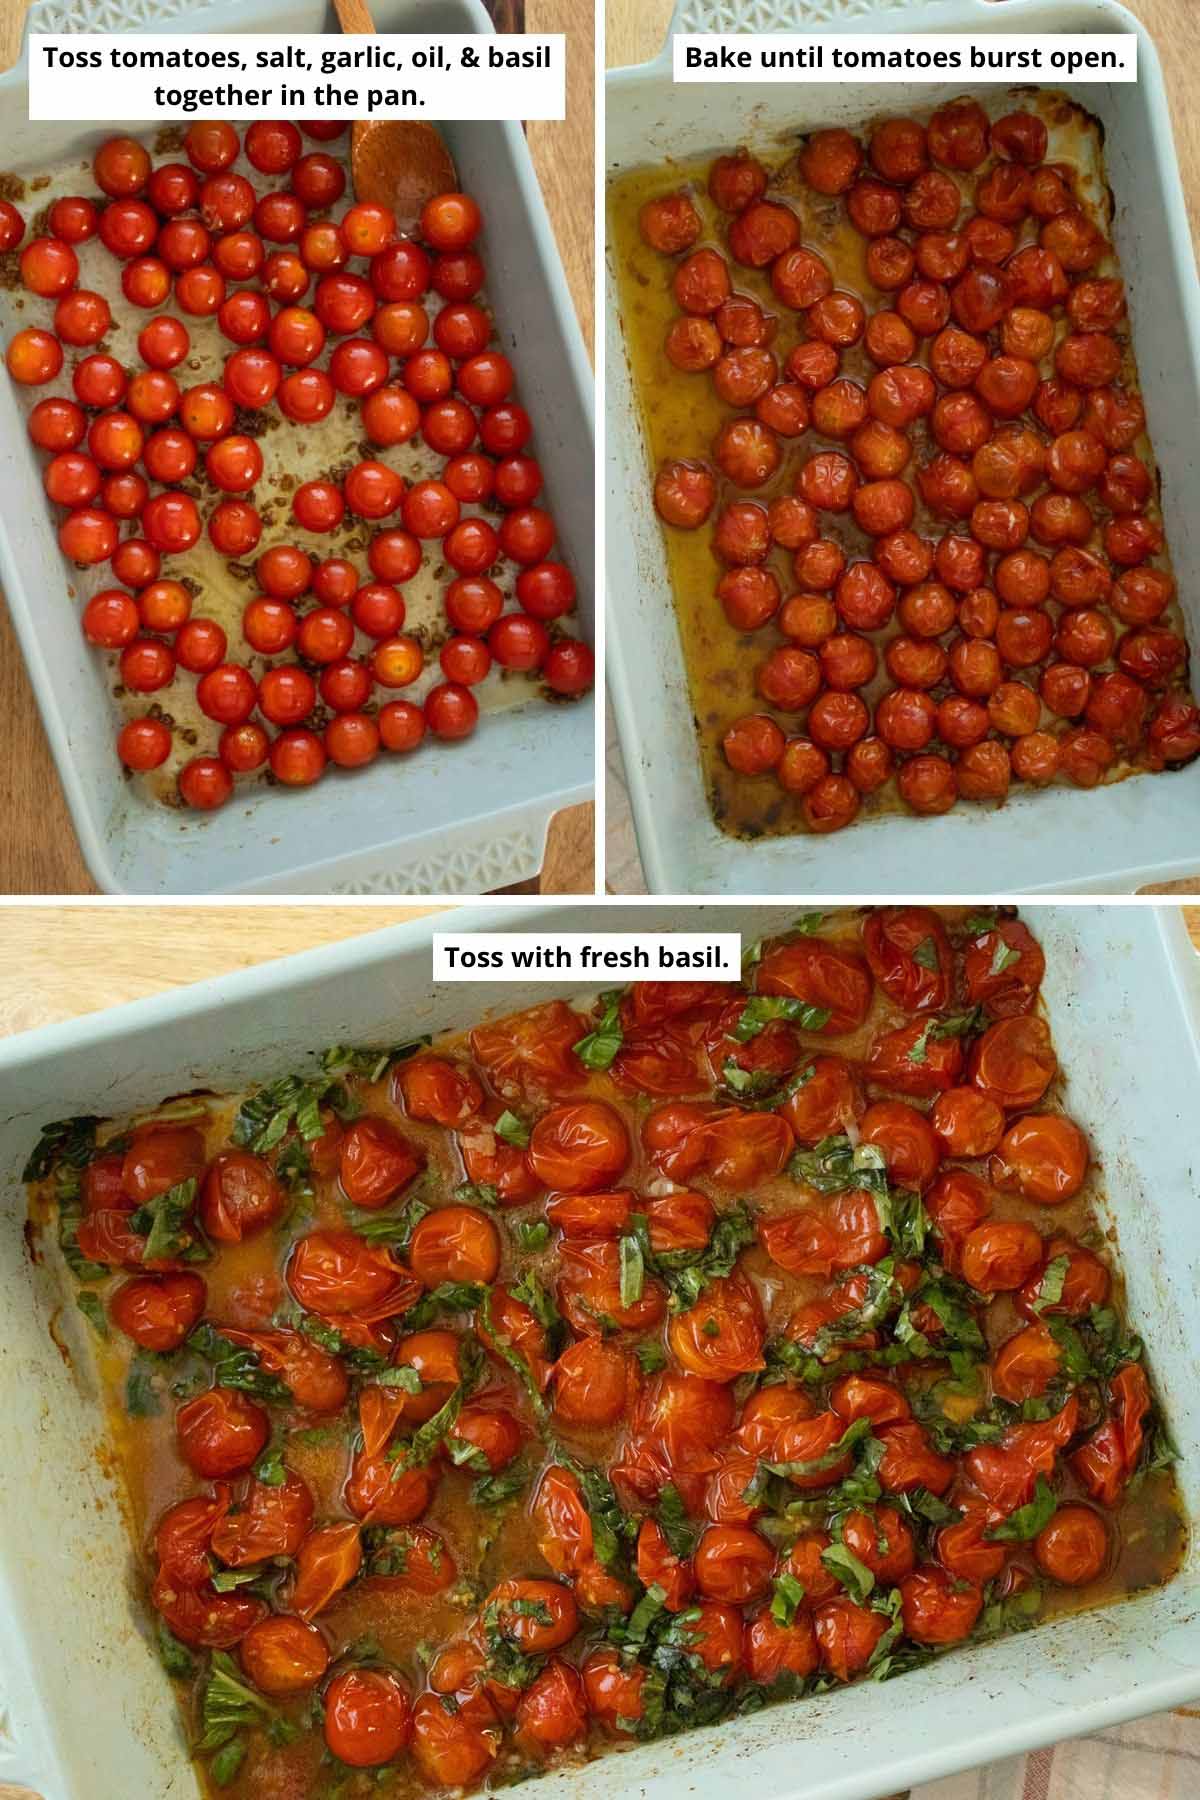 image collage showing the tomatoes, garlic, basil, oil, and salt in the baking pan before and after baking and after tossing with fresh basil